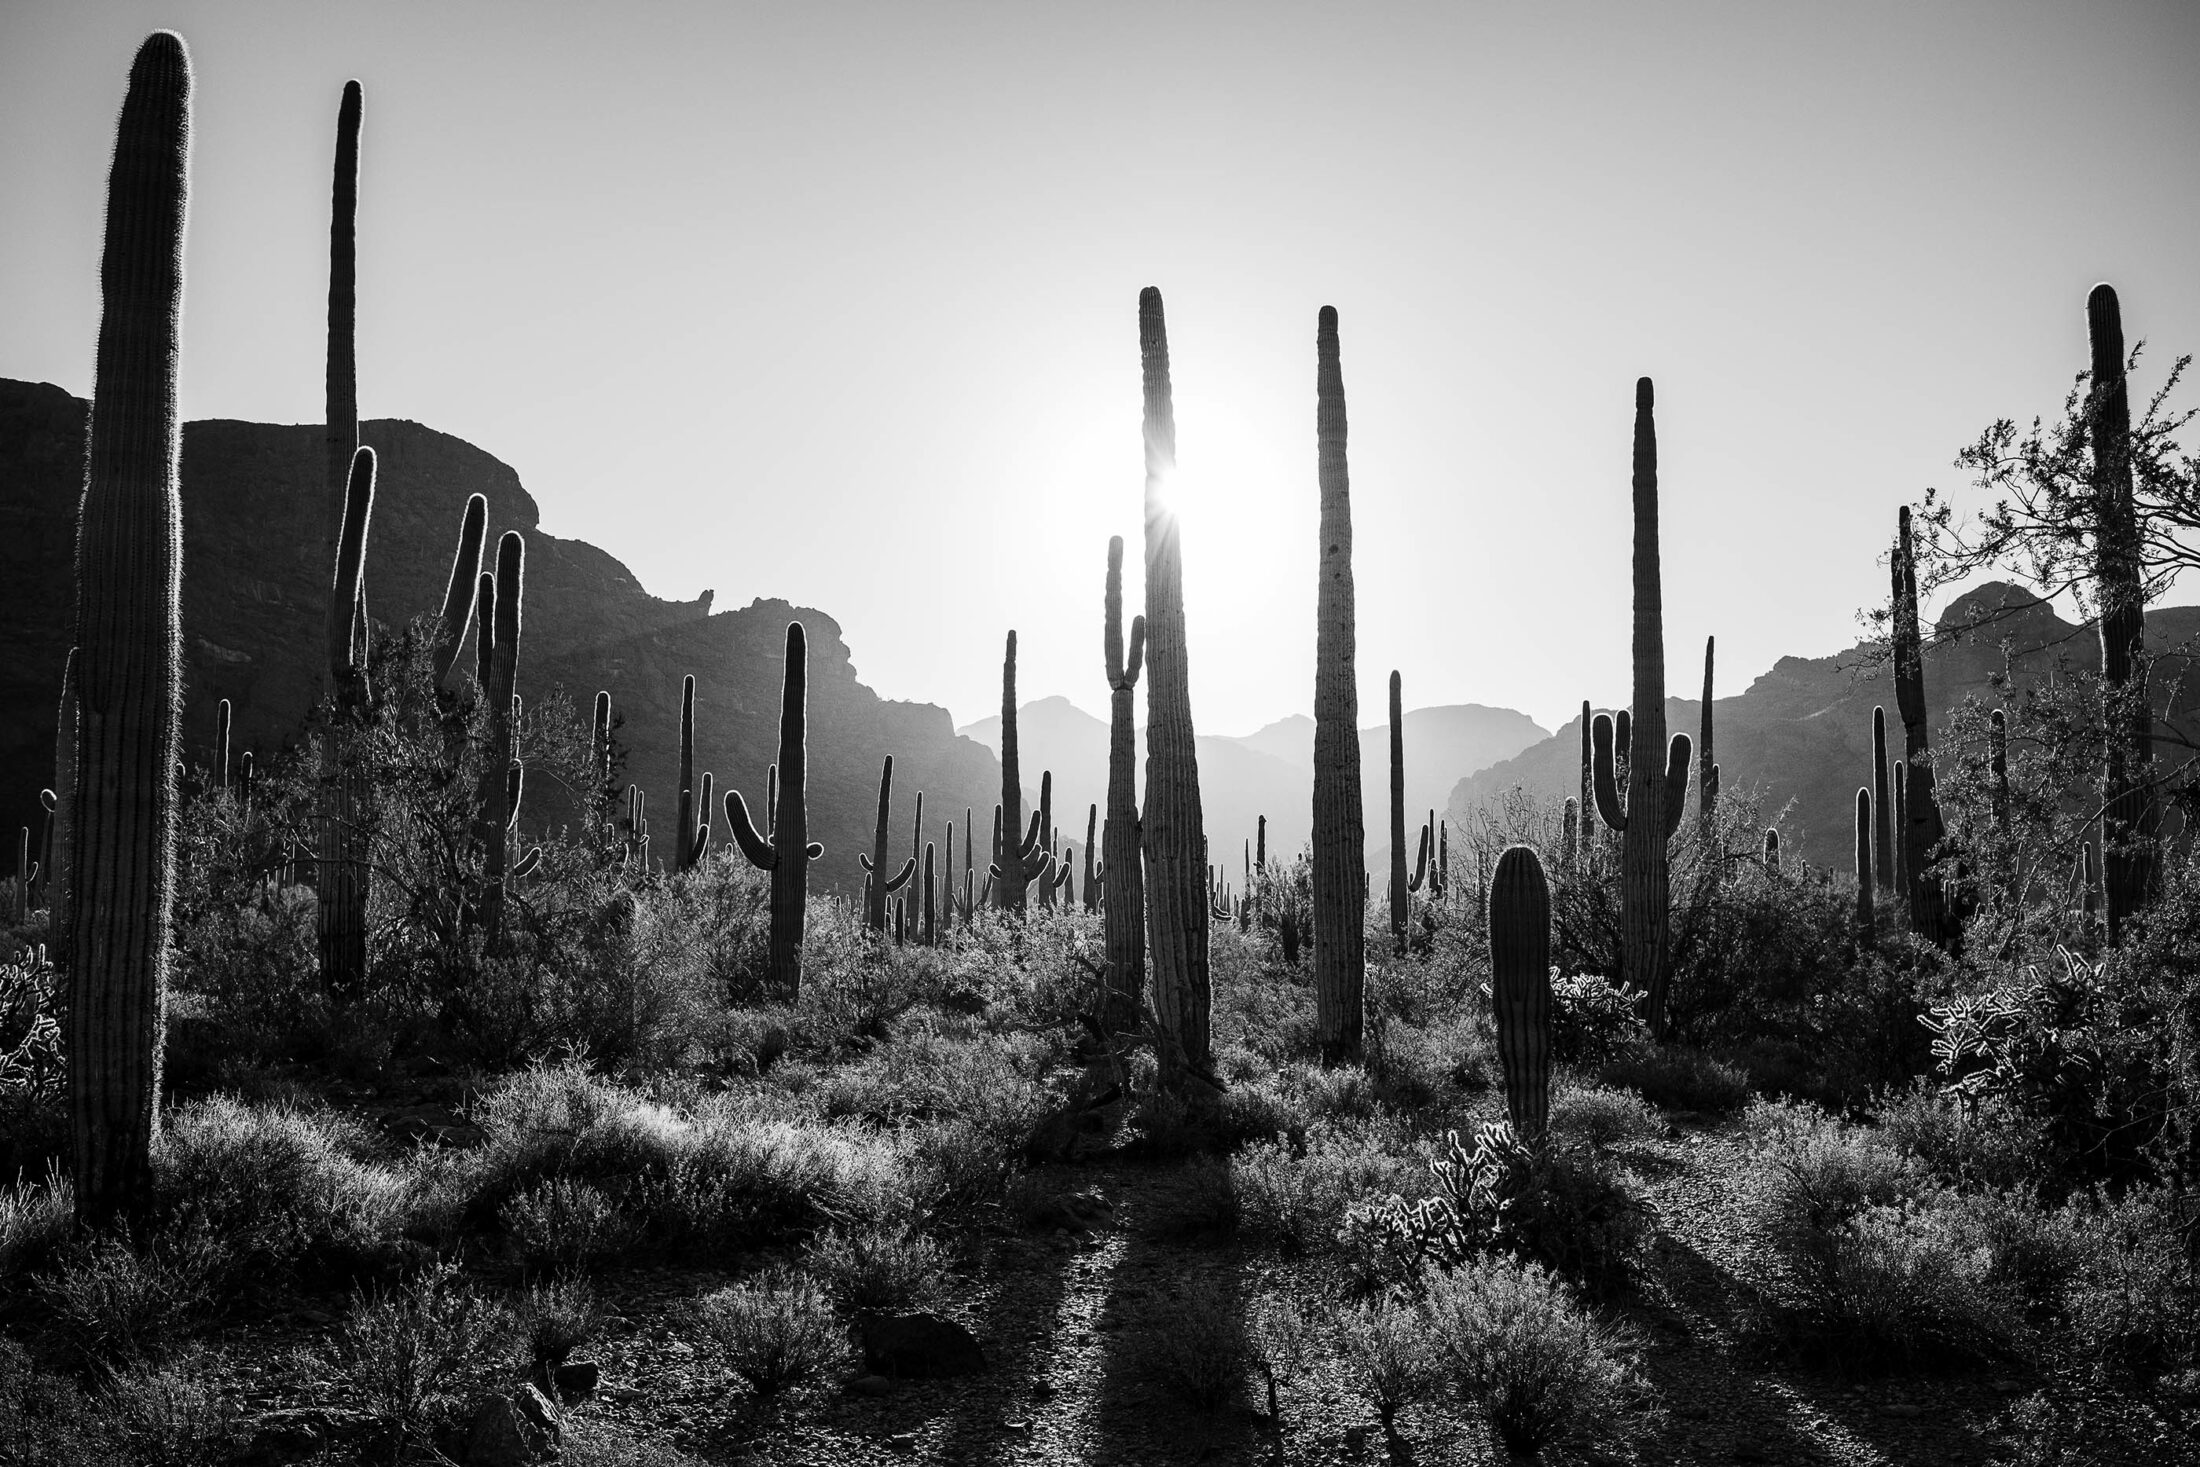 Saguaro cactuses are under threat because of climate change